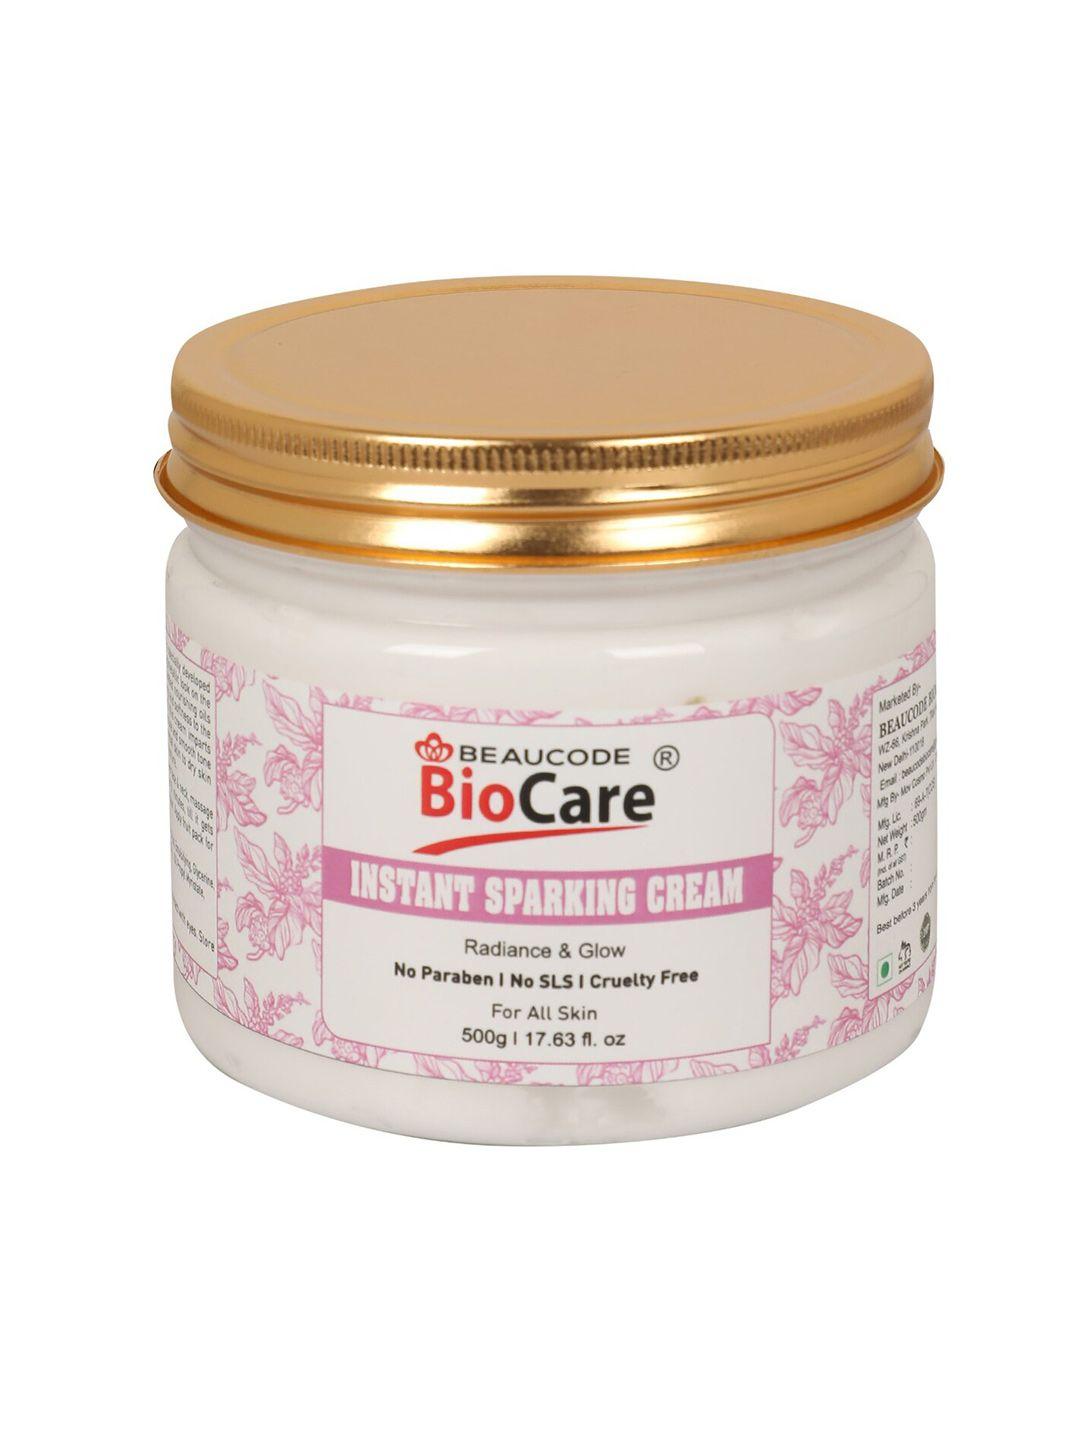 BEAUCODE BIOCARE Instant Sparkling Face & Body Cream for All Skin Types - 500 g